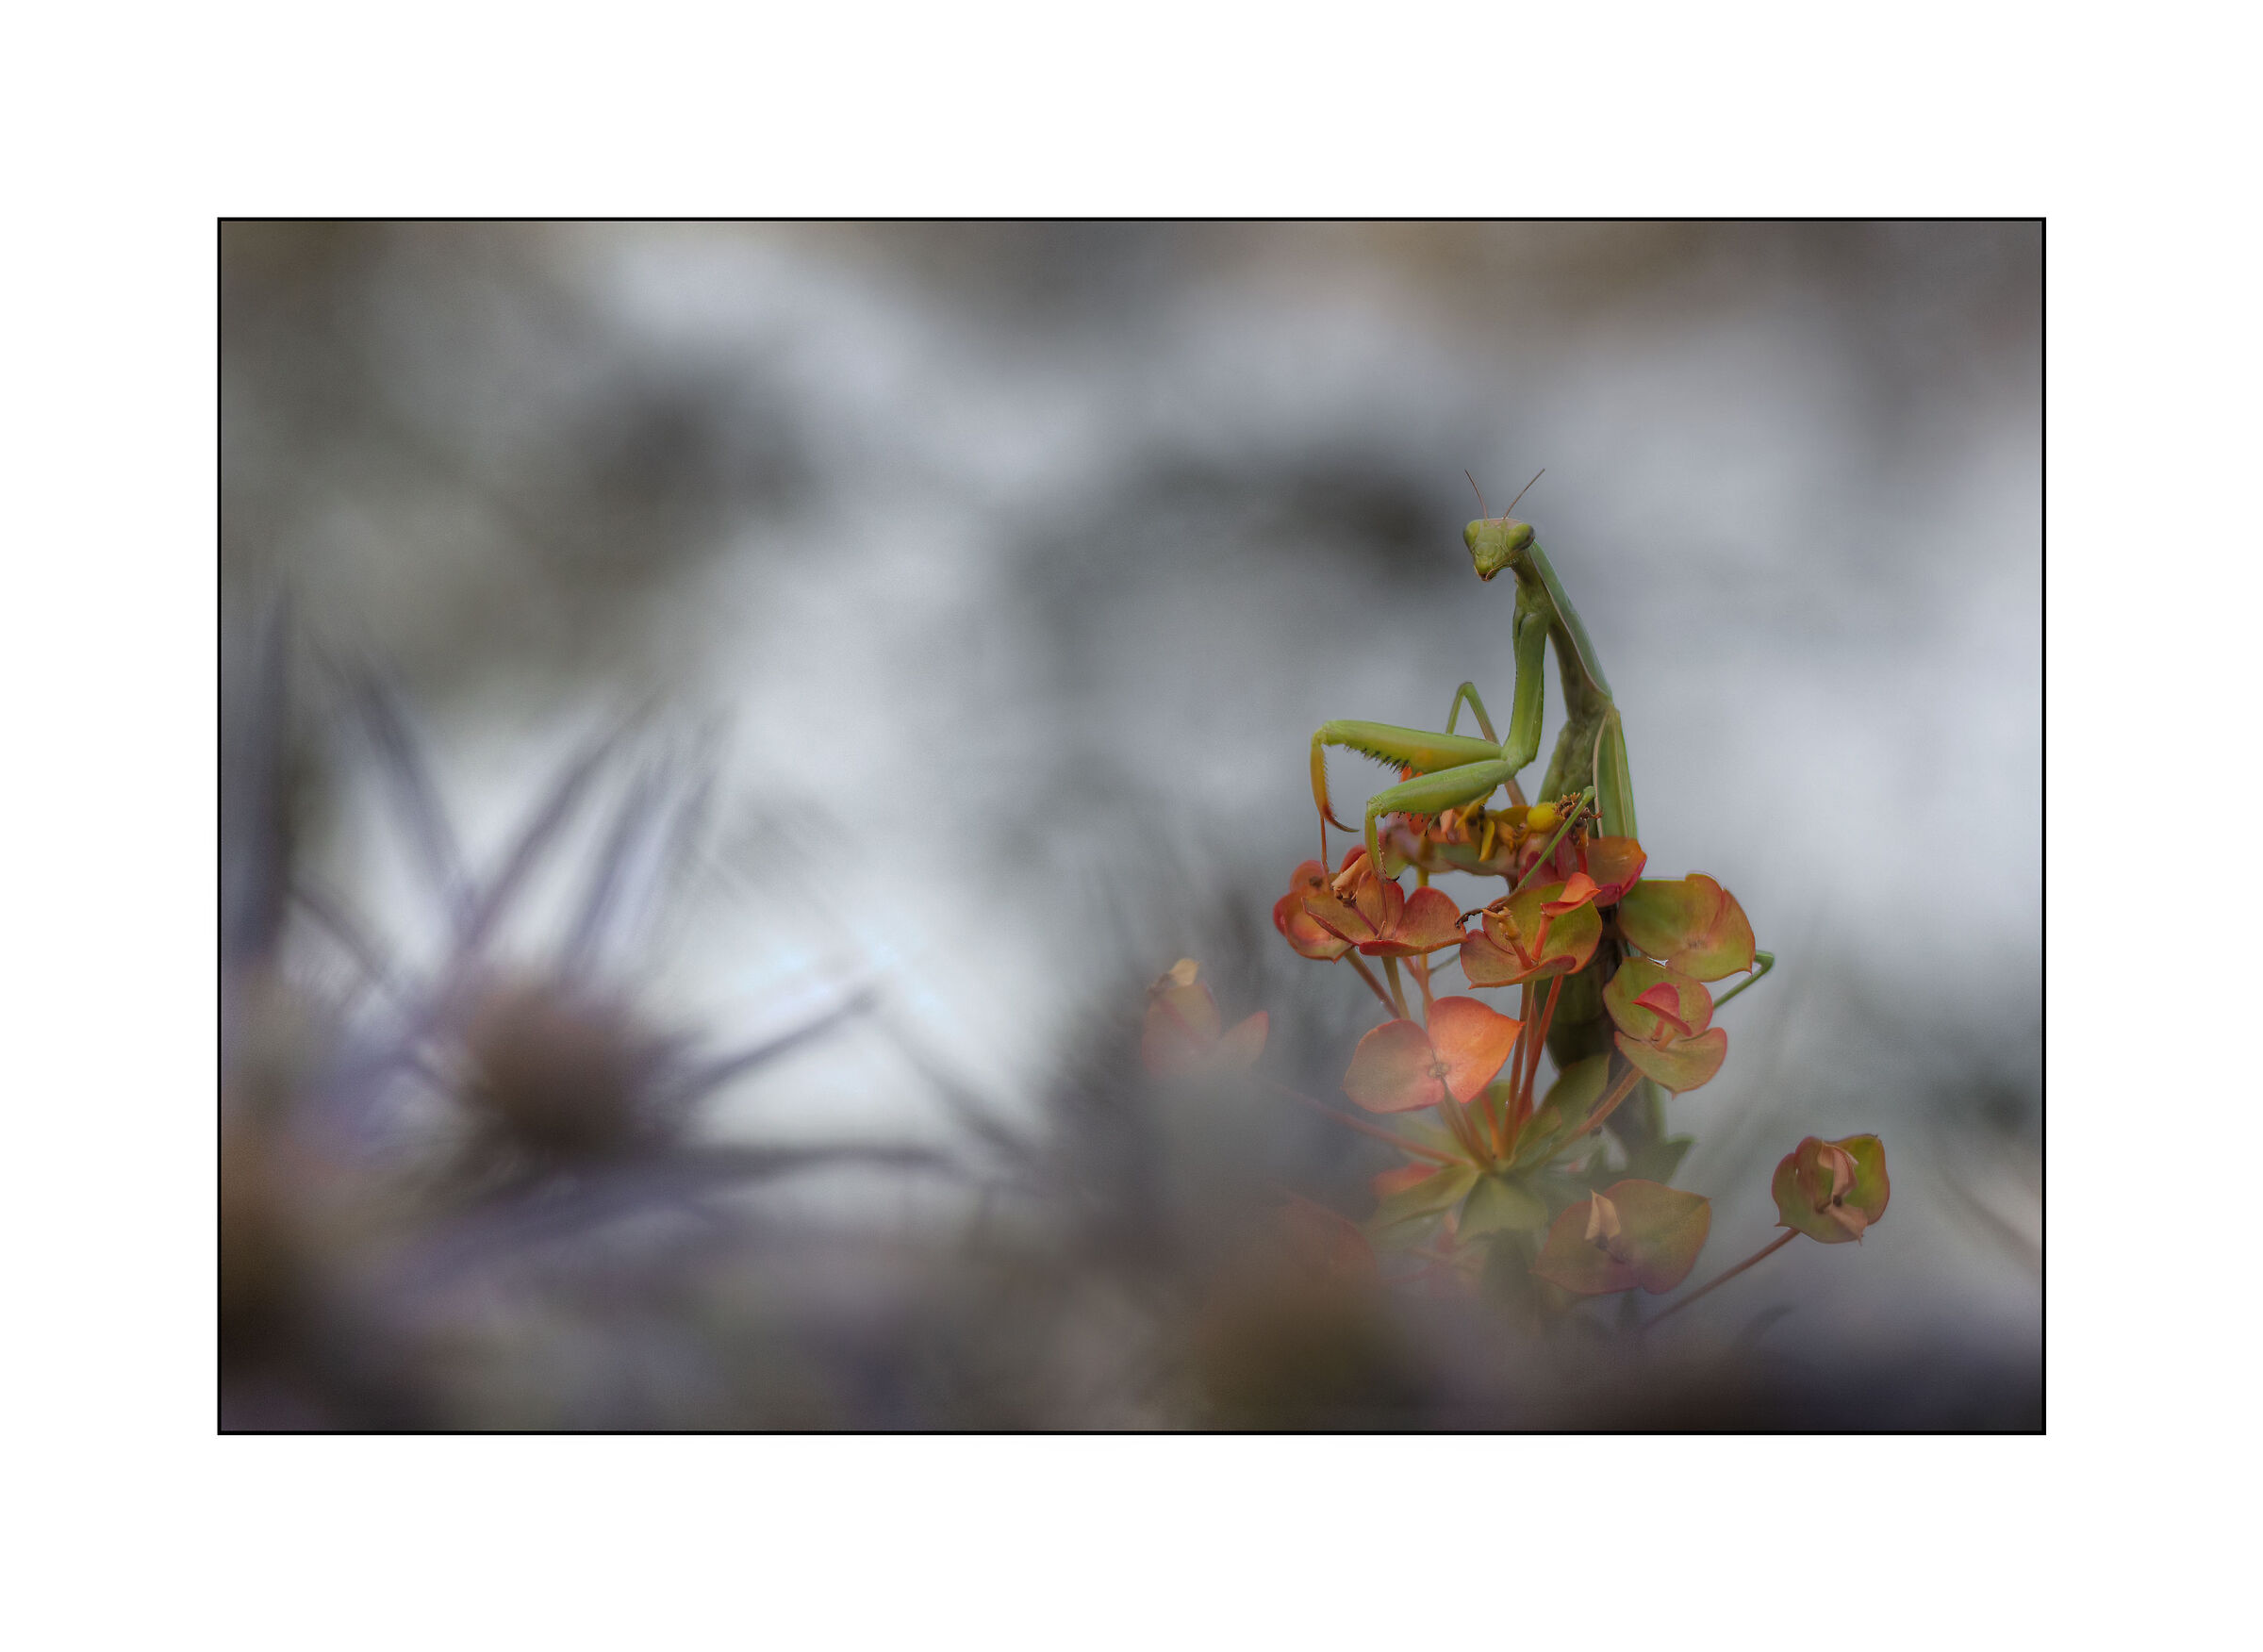 The mantis and the spurge...